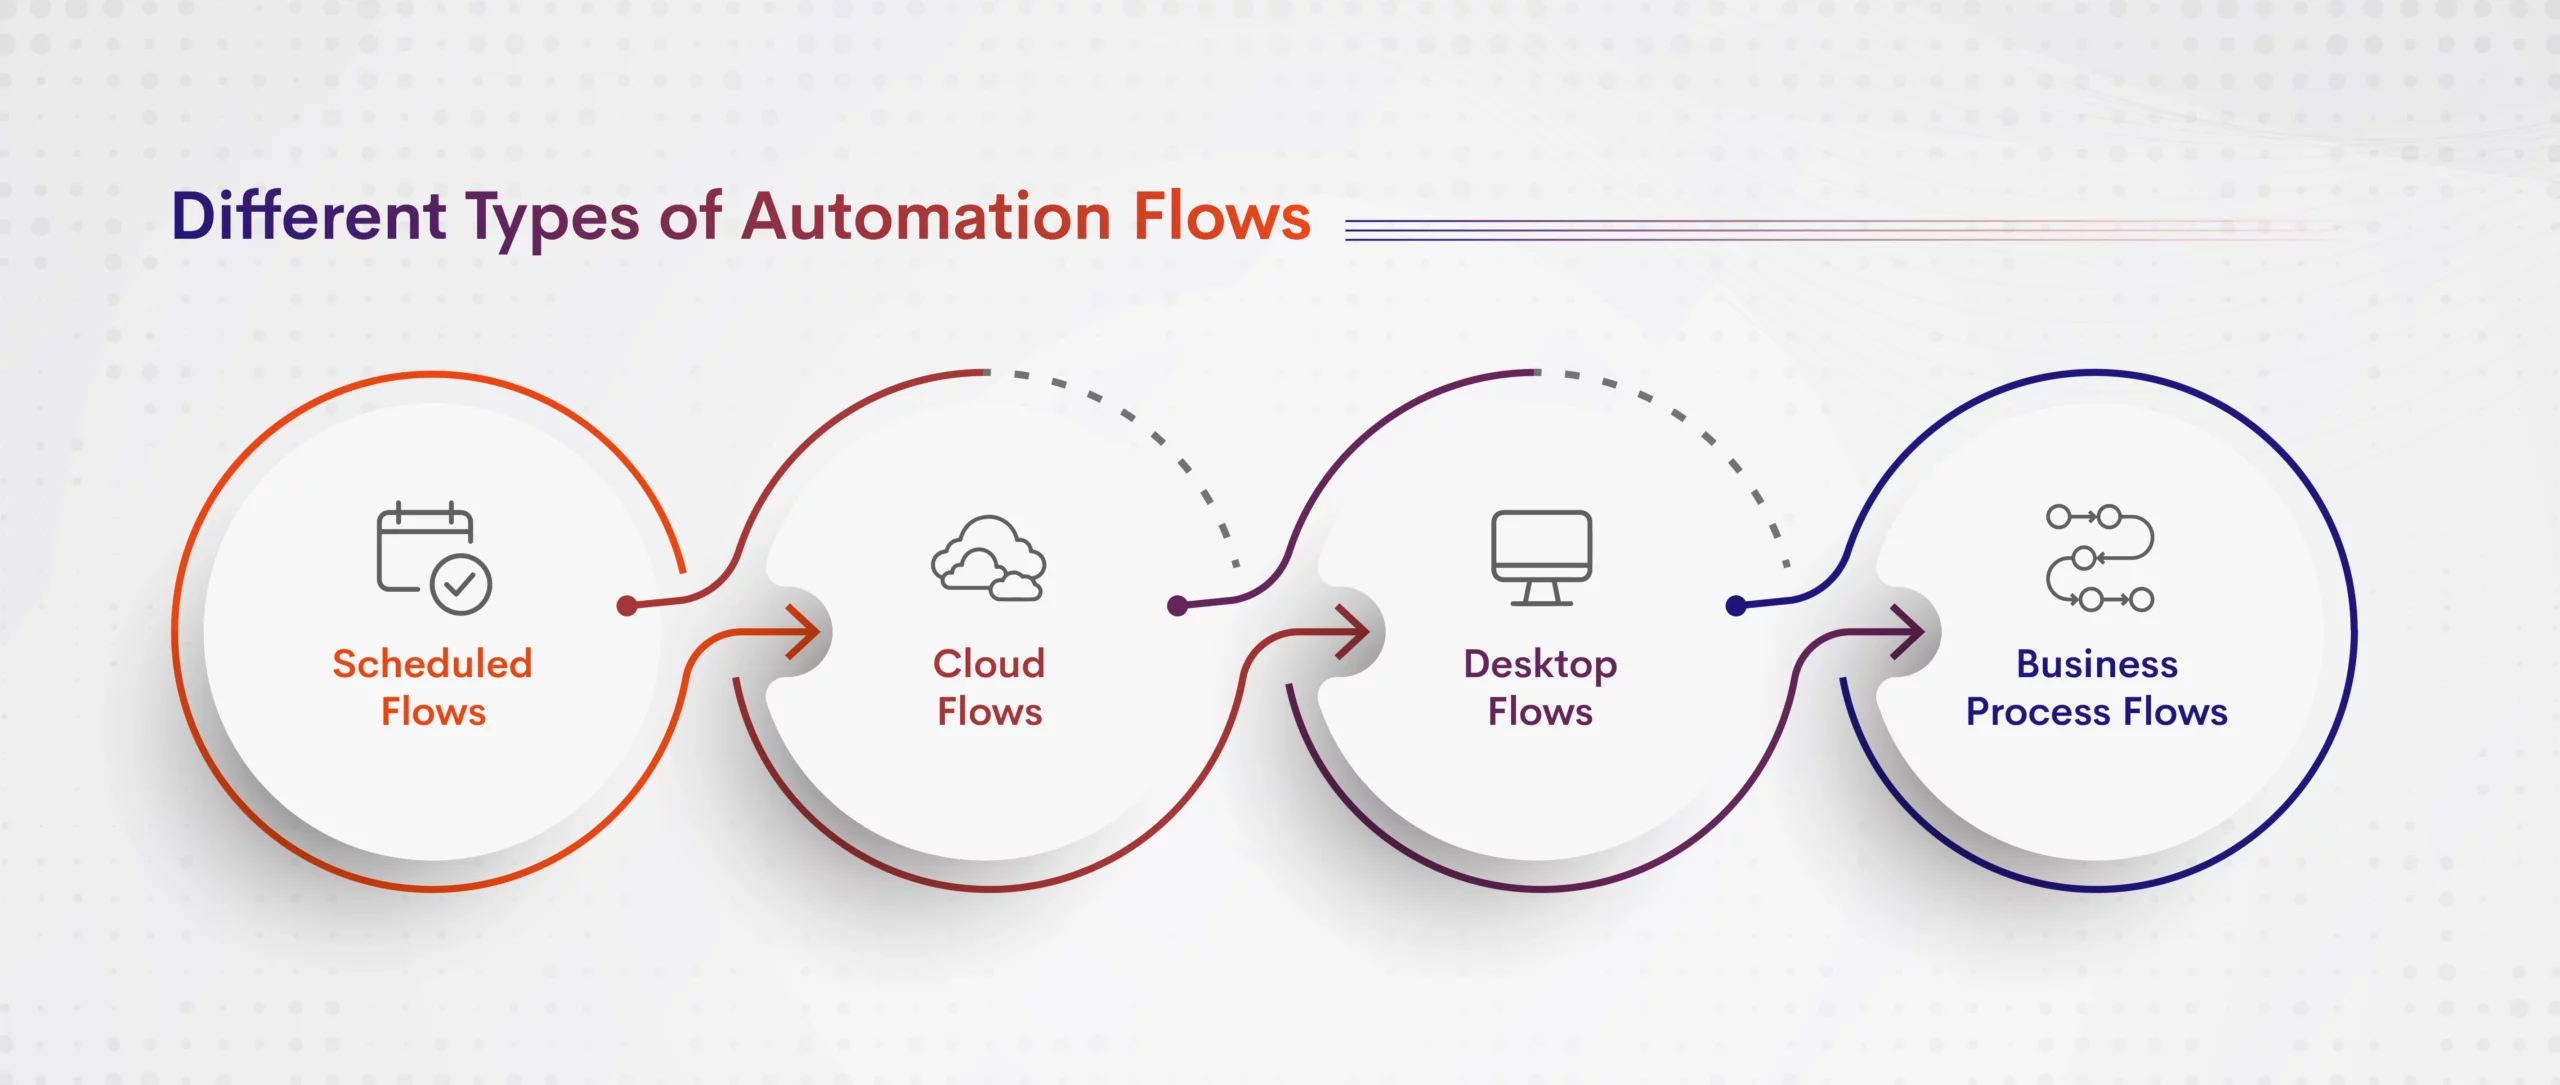 Types of Automation Flows